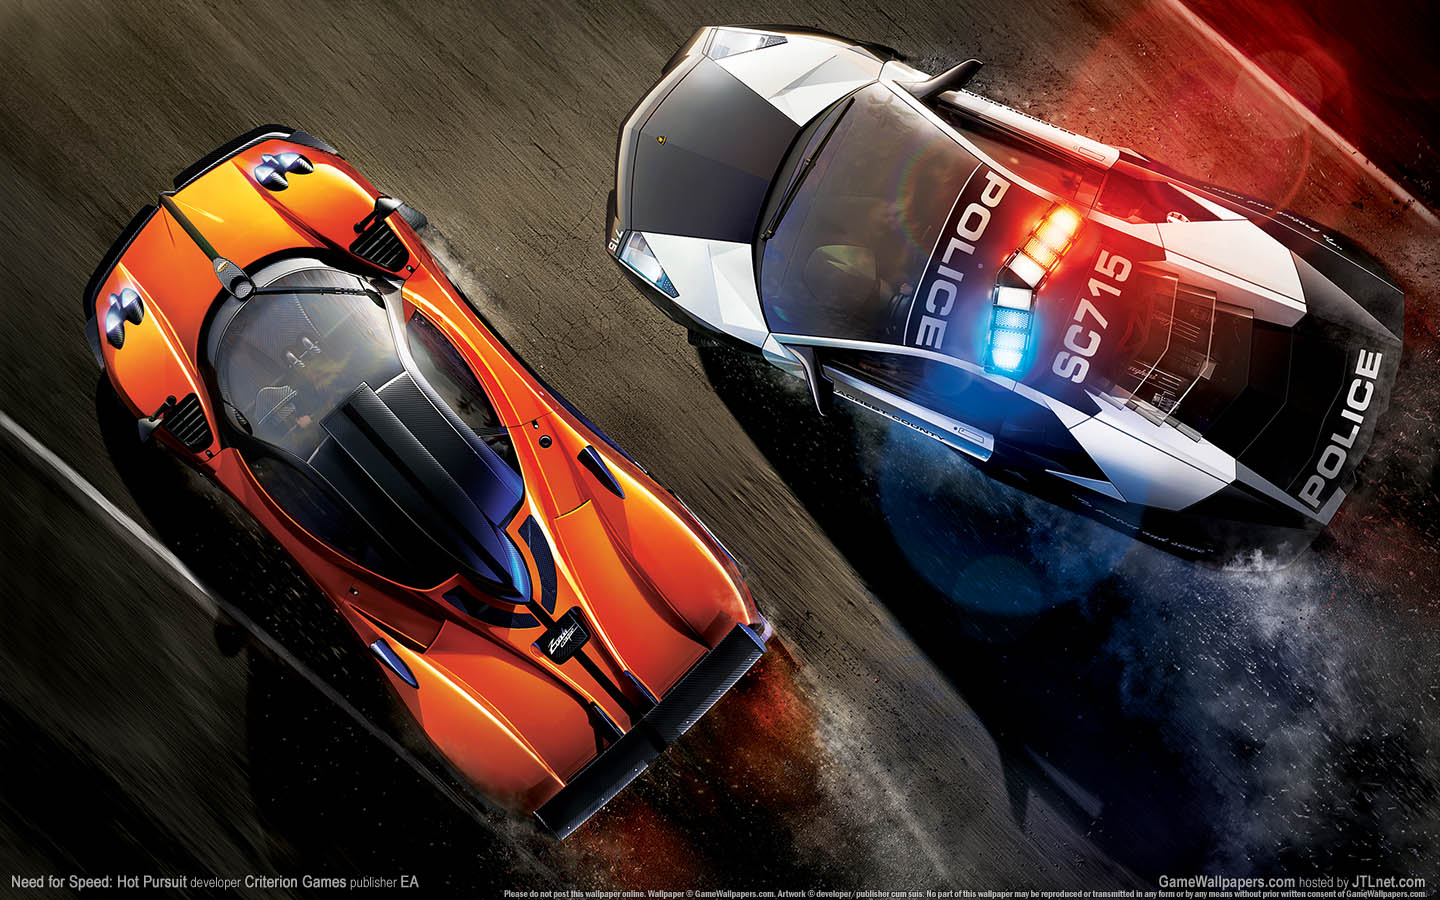 Need for Speed: Hot Pursuit fond d'cran 01 1440x900